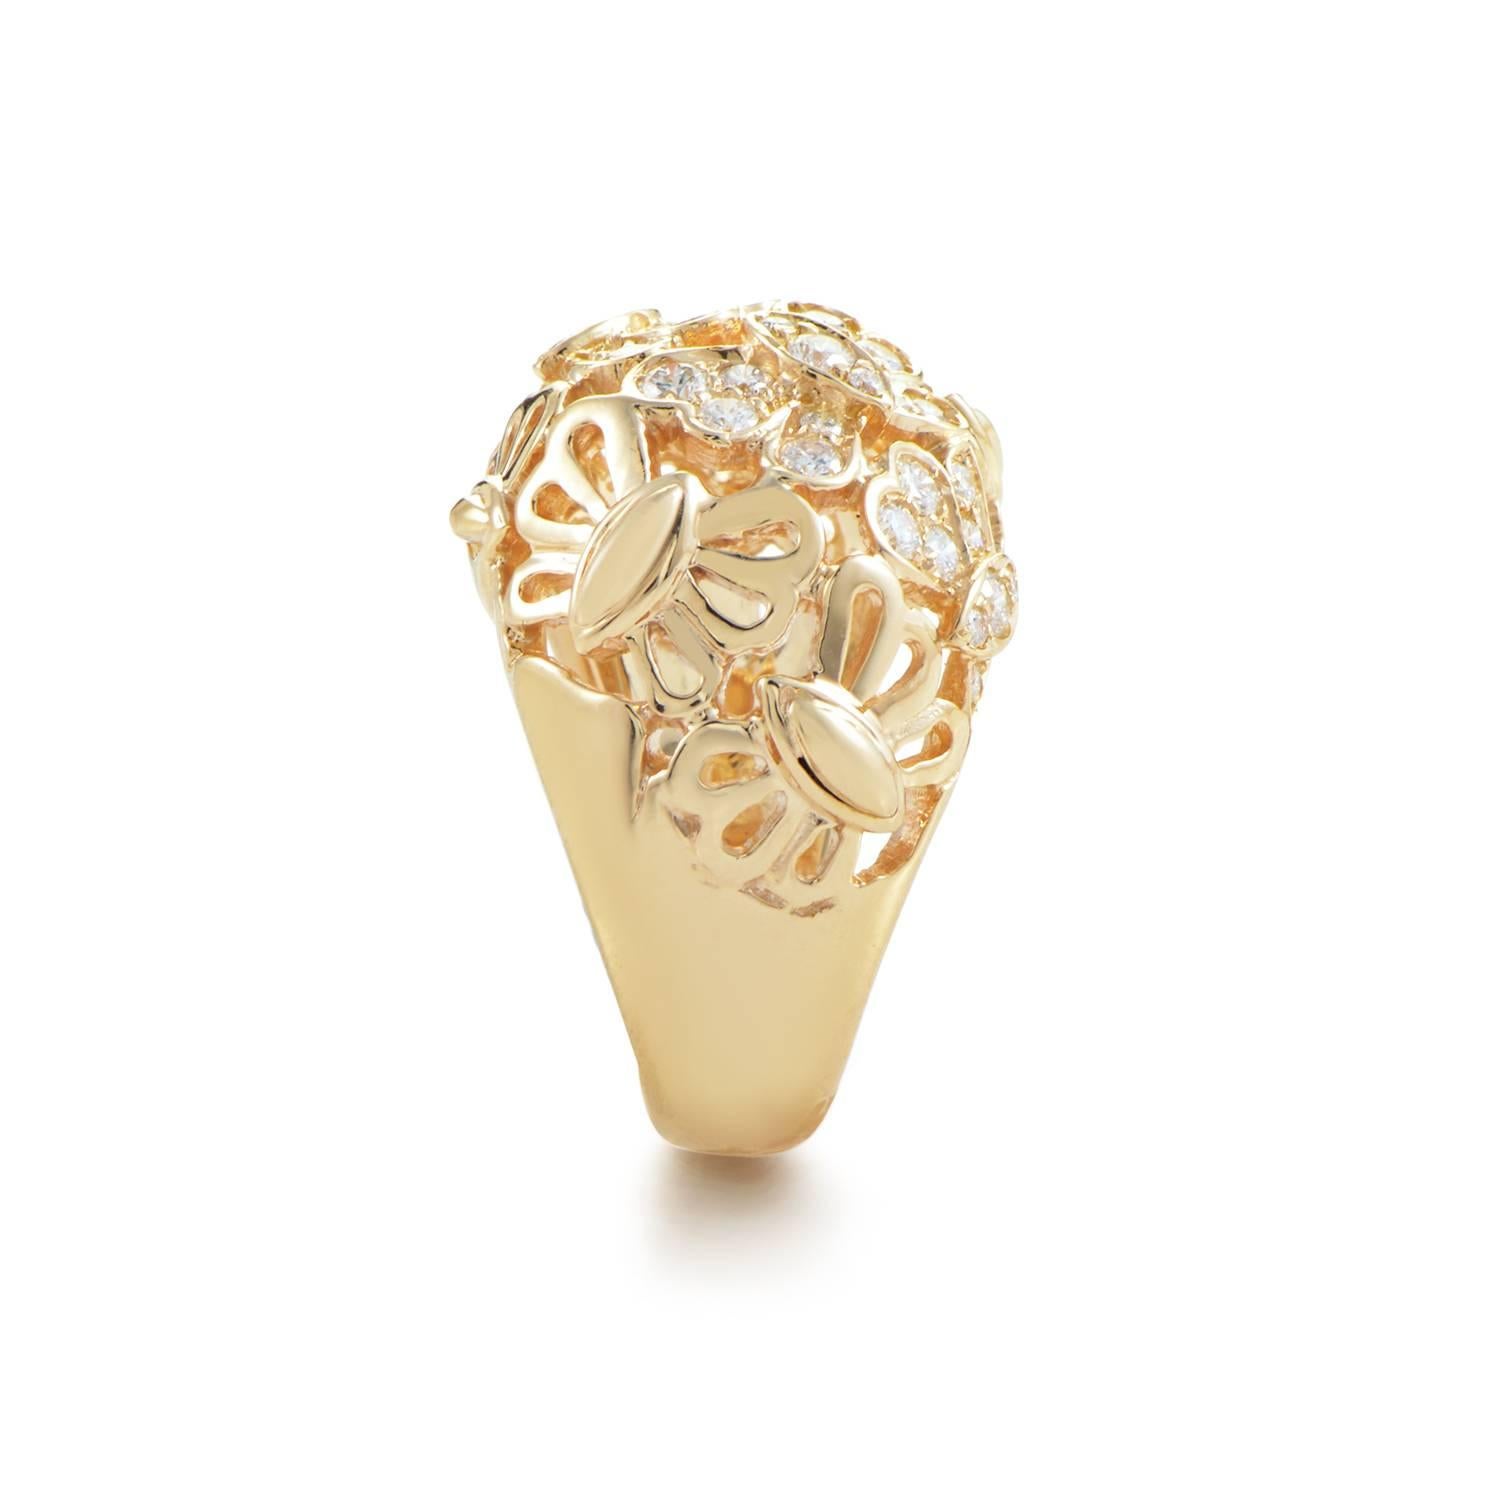 Take your style to the next level with this glamorous Tiffany & Co. cocktail ring! The ring boasts an intricate design forged from 18K yellow gold and set with white diamonds. This radiant ring can be bought individually or as part of a set. Please